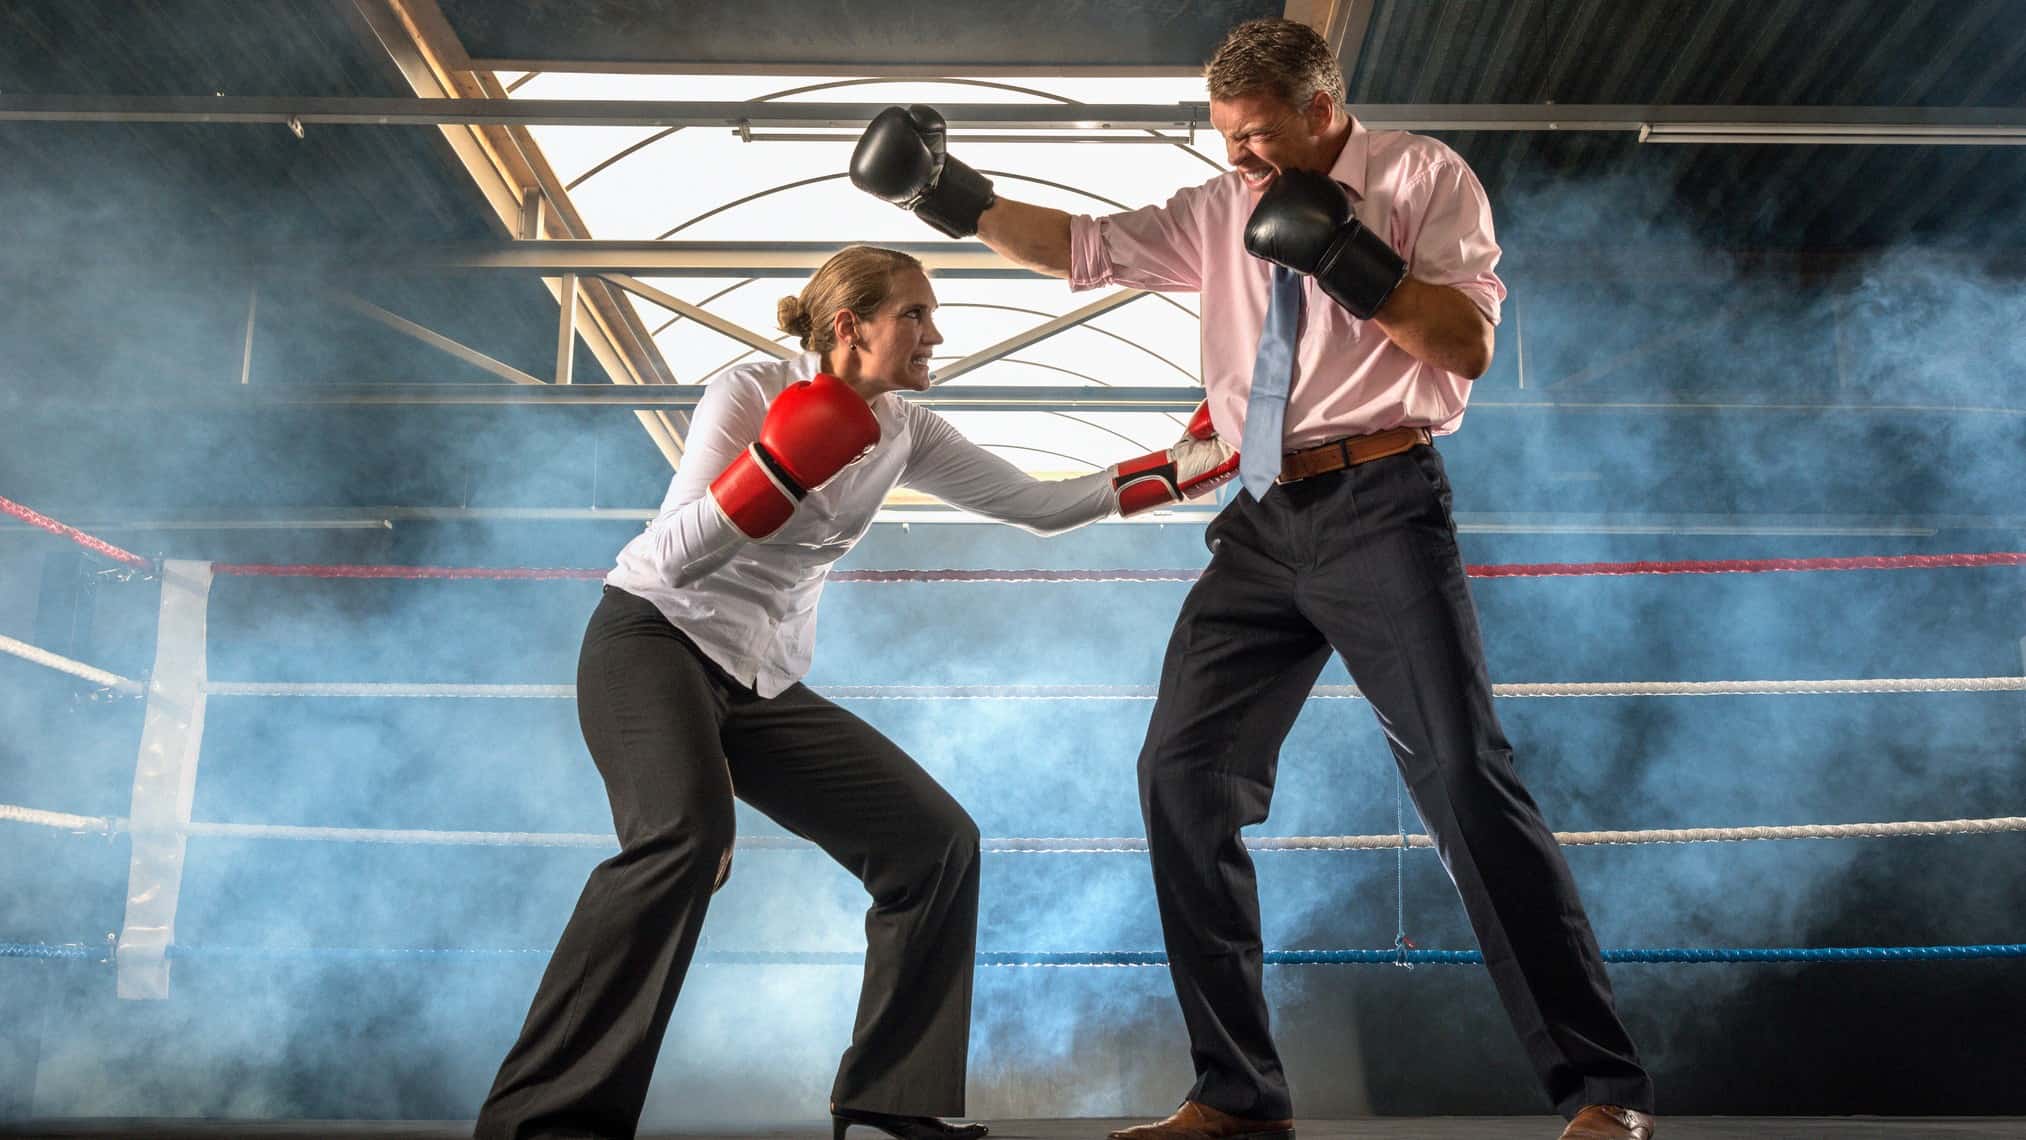 A woman in a business suit and a man in a business suit boxing in a ring.